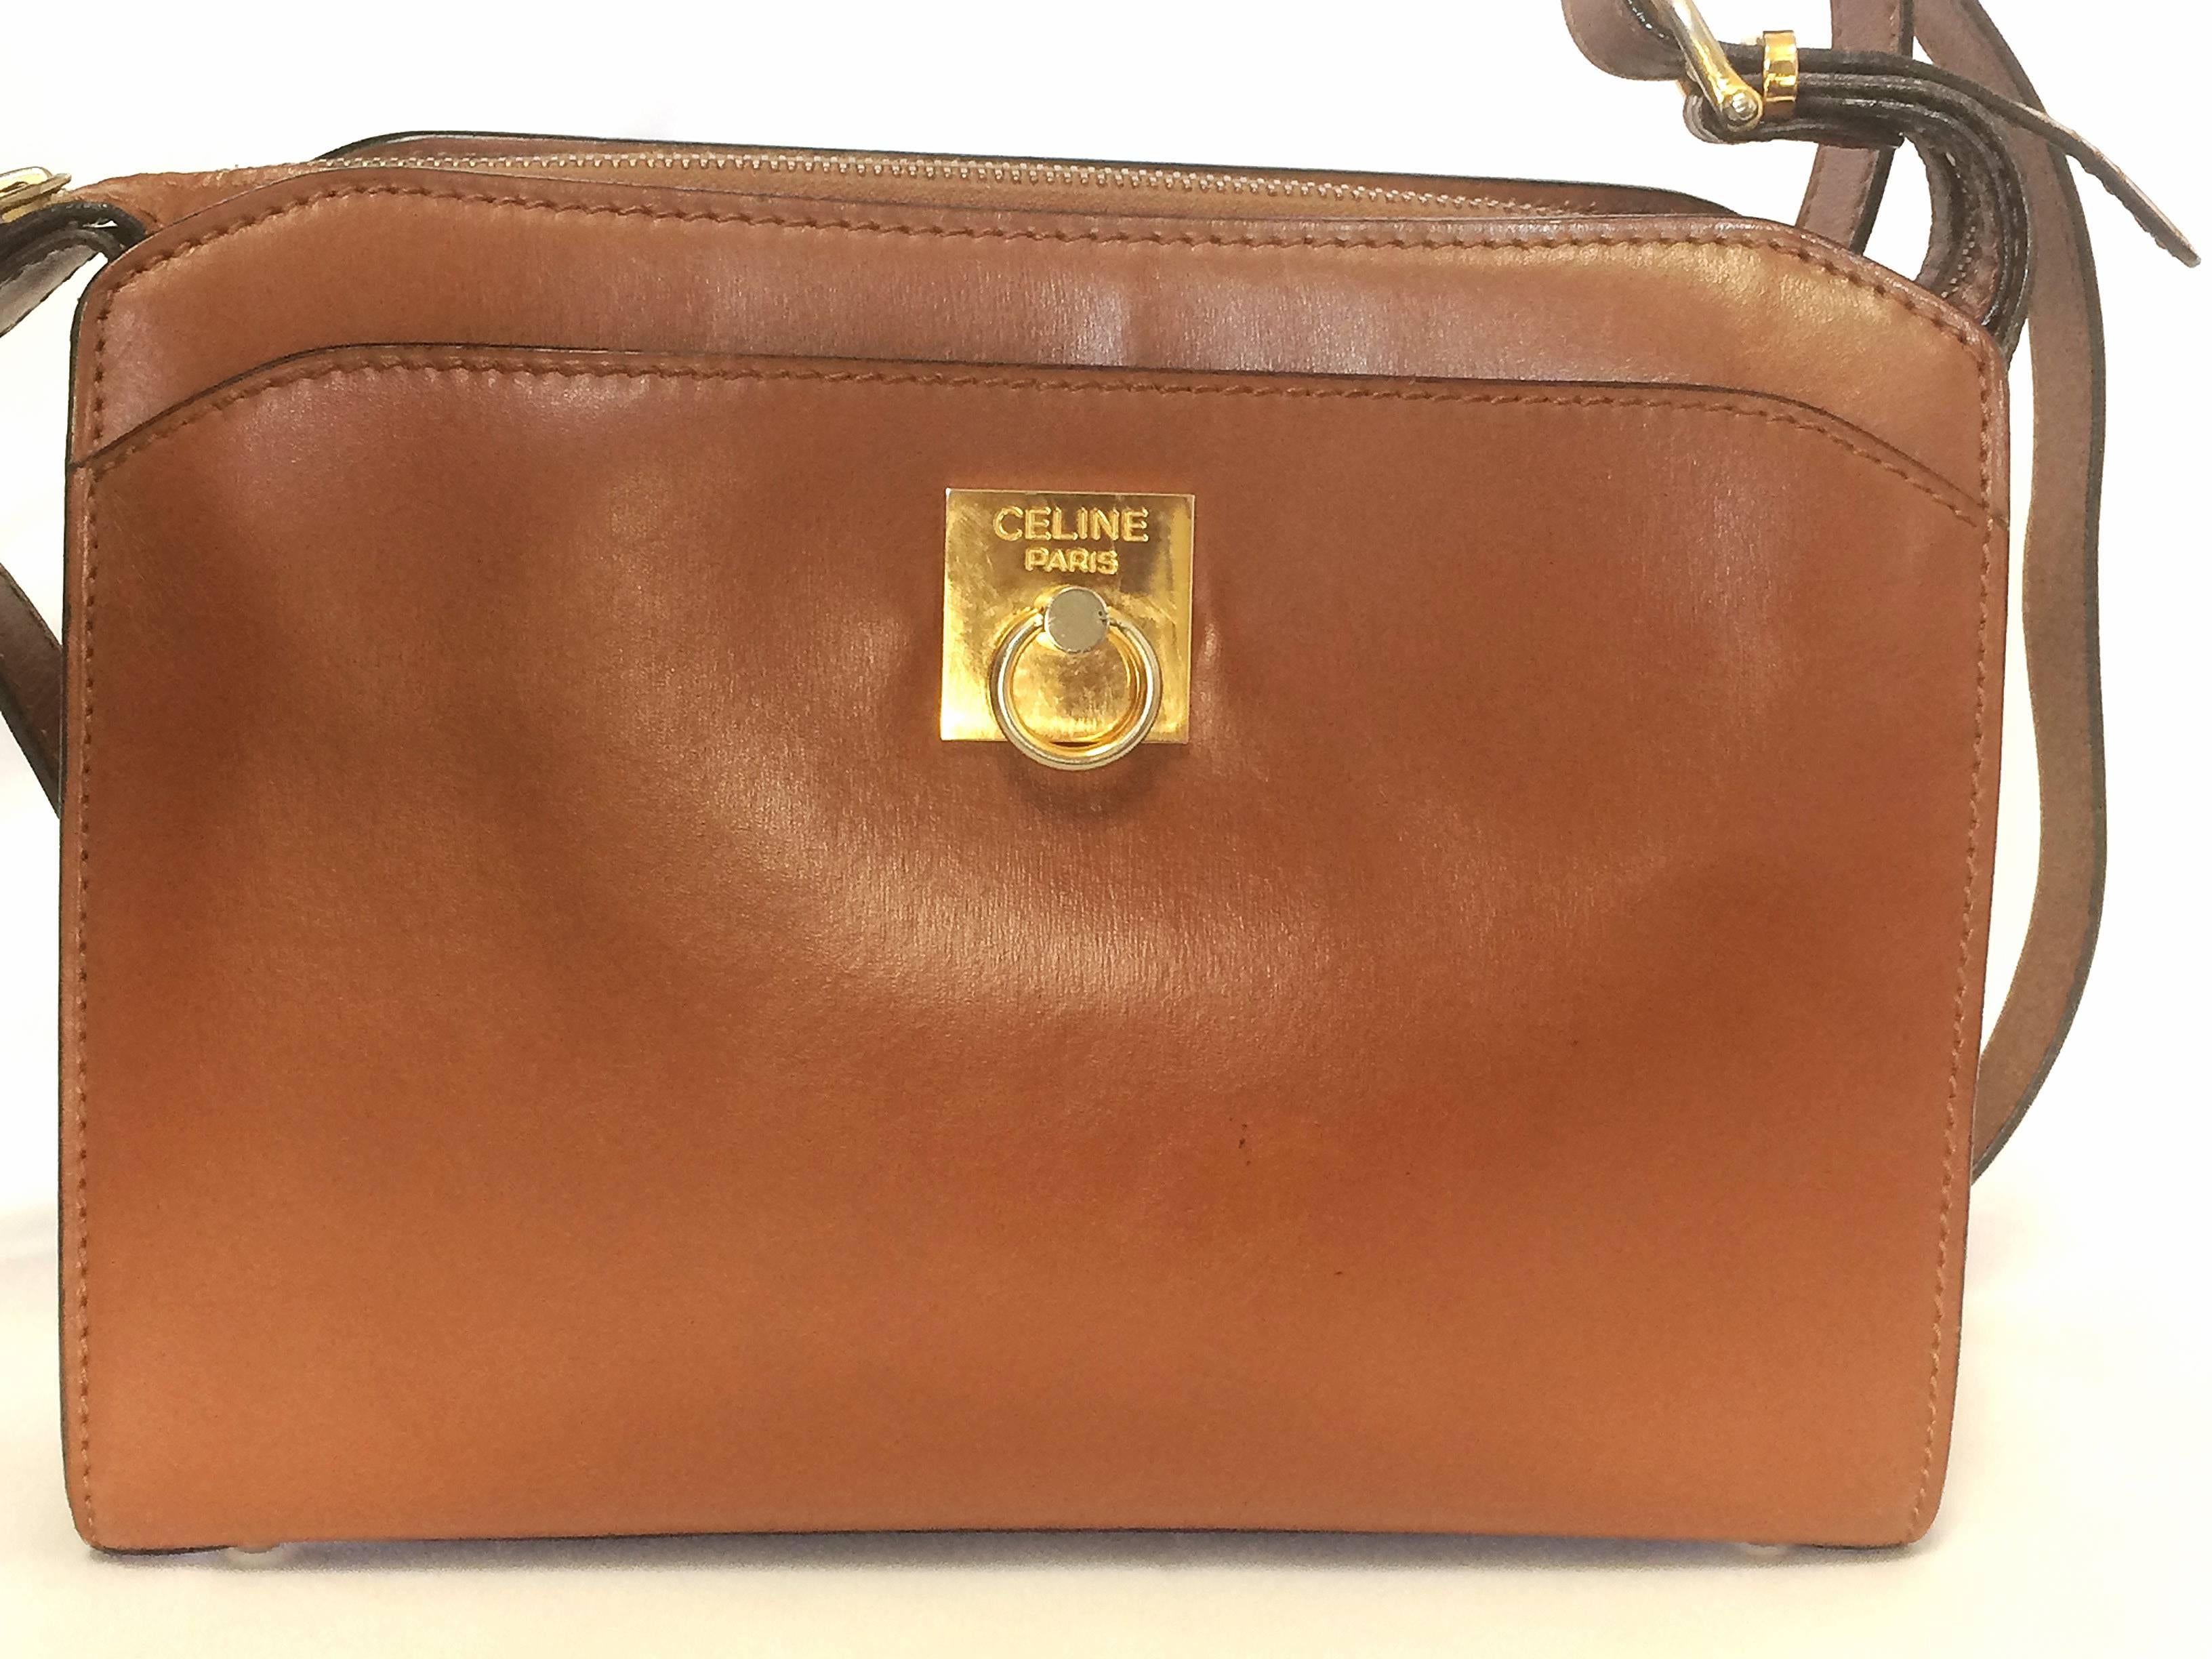 1990s. Vintage CELINE genuine brown leather shoulder bag with golden logo motif at front. Rare Celine leather bag

For all CELINE vintage lovers, this unique and rare vintage masterpiece is right for you!
Classic purse in brown